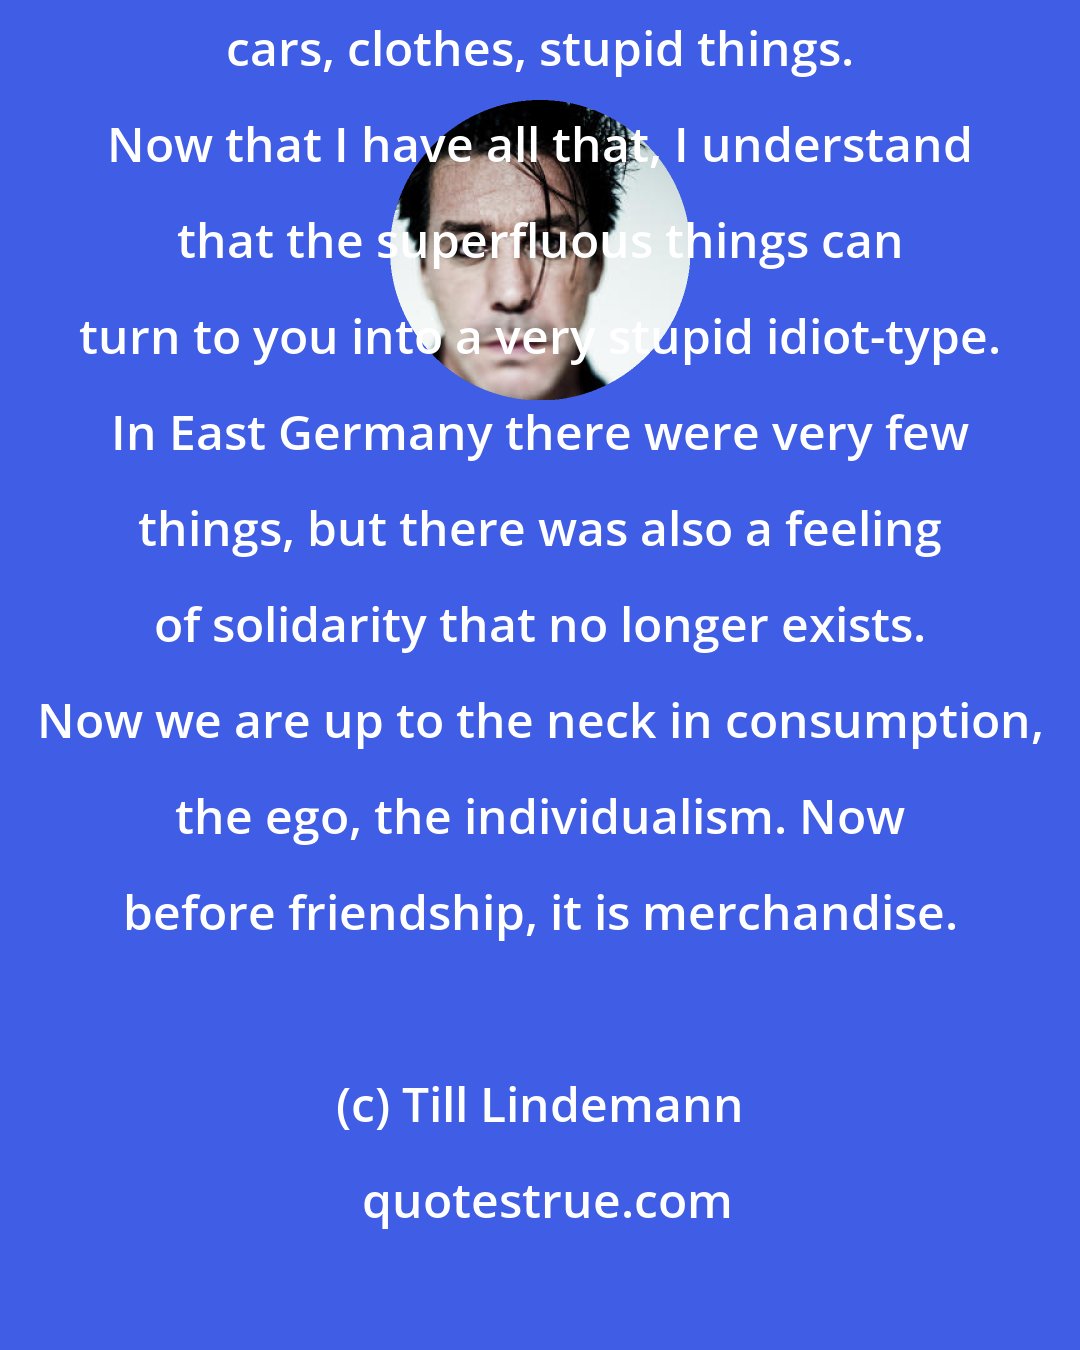 Till Lindemann: When I was an adolescent, I was obsessed with having many commercial things, cars, clothes, stupid things. Now that I have all that, I understand that the superfluous things can turn to you into a very stupid idiot-type. In East Germany there were very few things, but there was also a feeling of solidarity that no longer exists. Now we are up to the neck in consumption, the ego, the individualism. Now before friendship, it is merchandise.